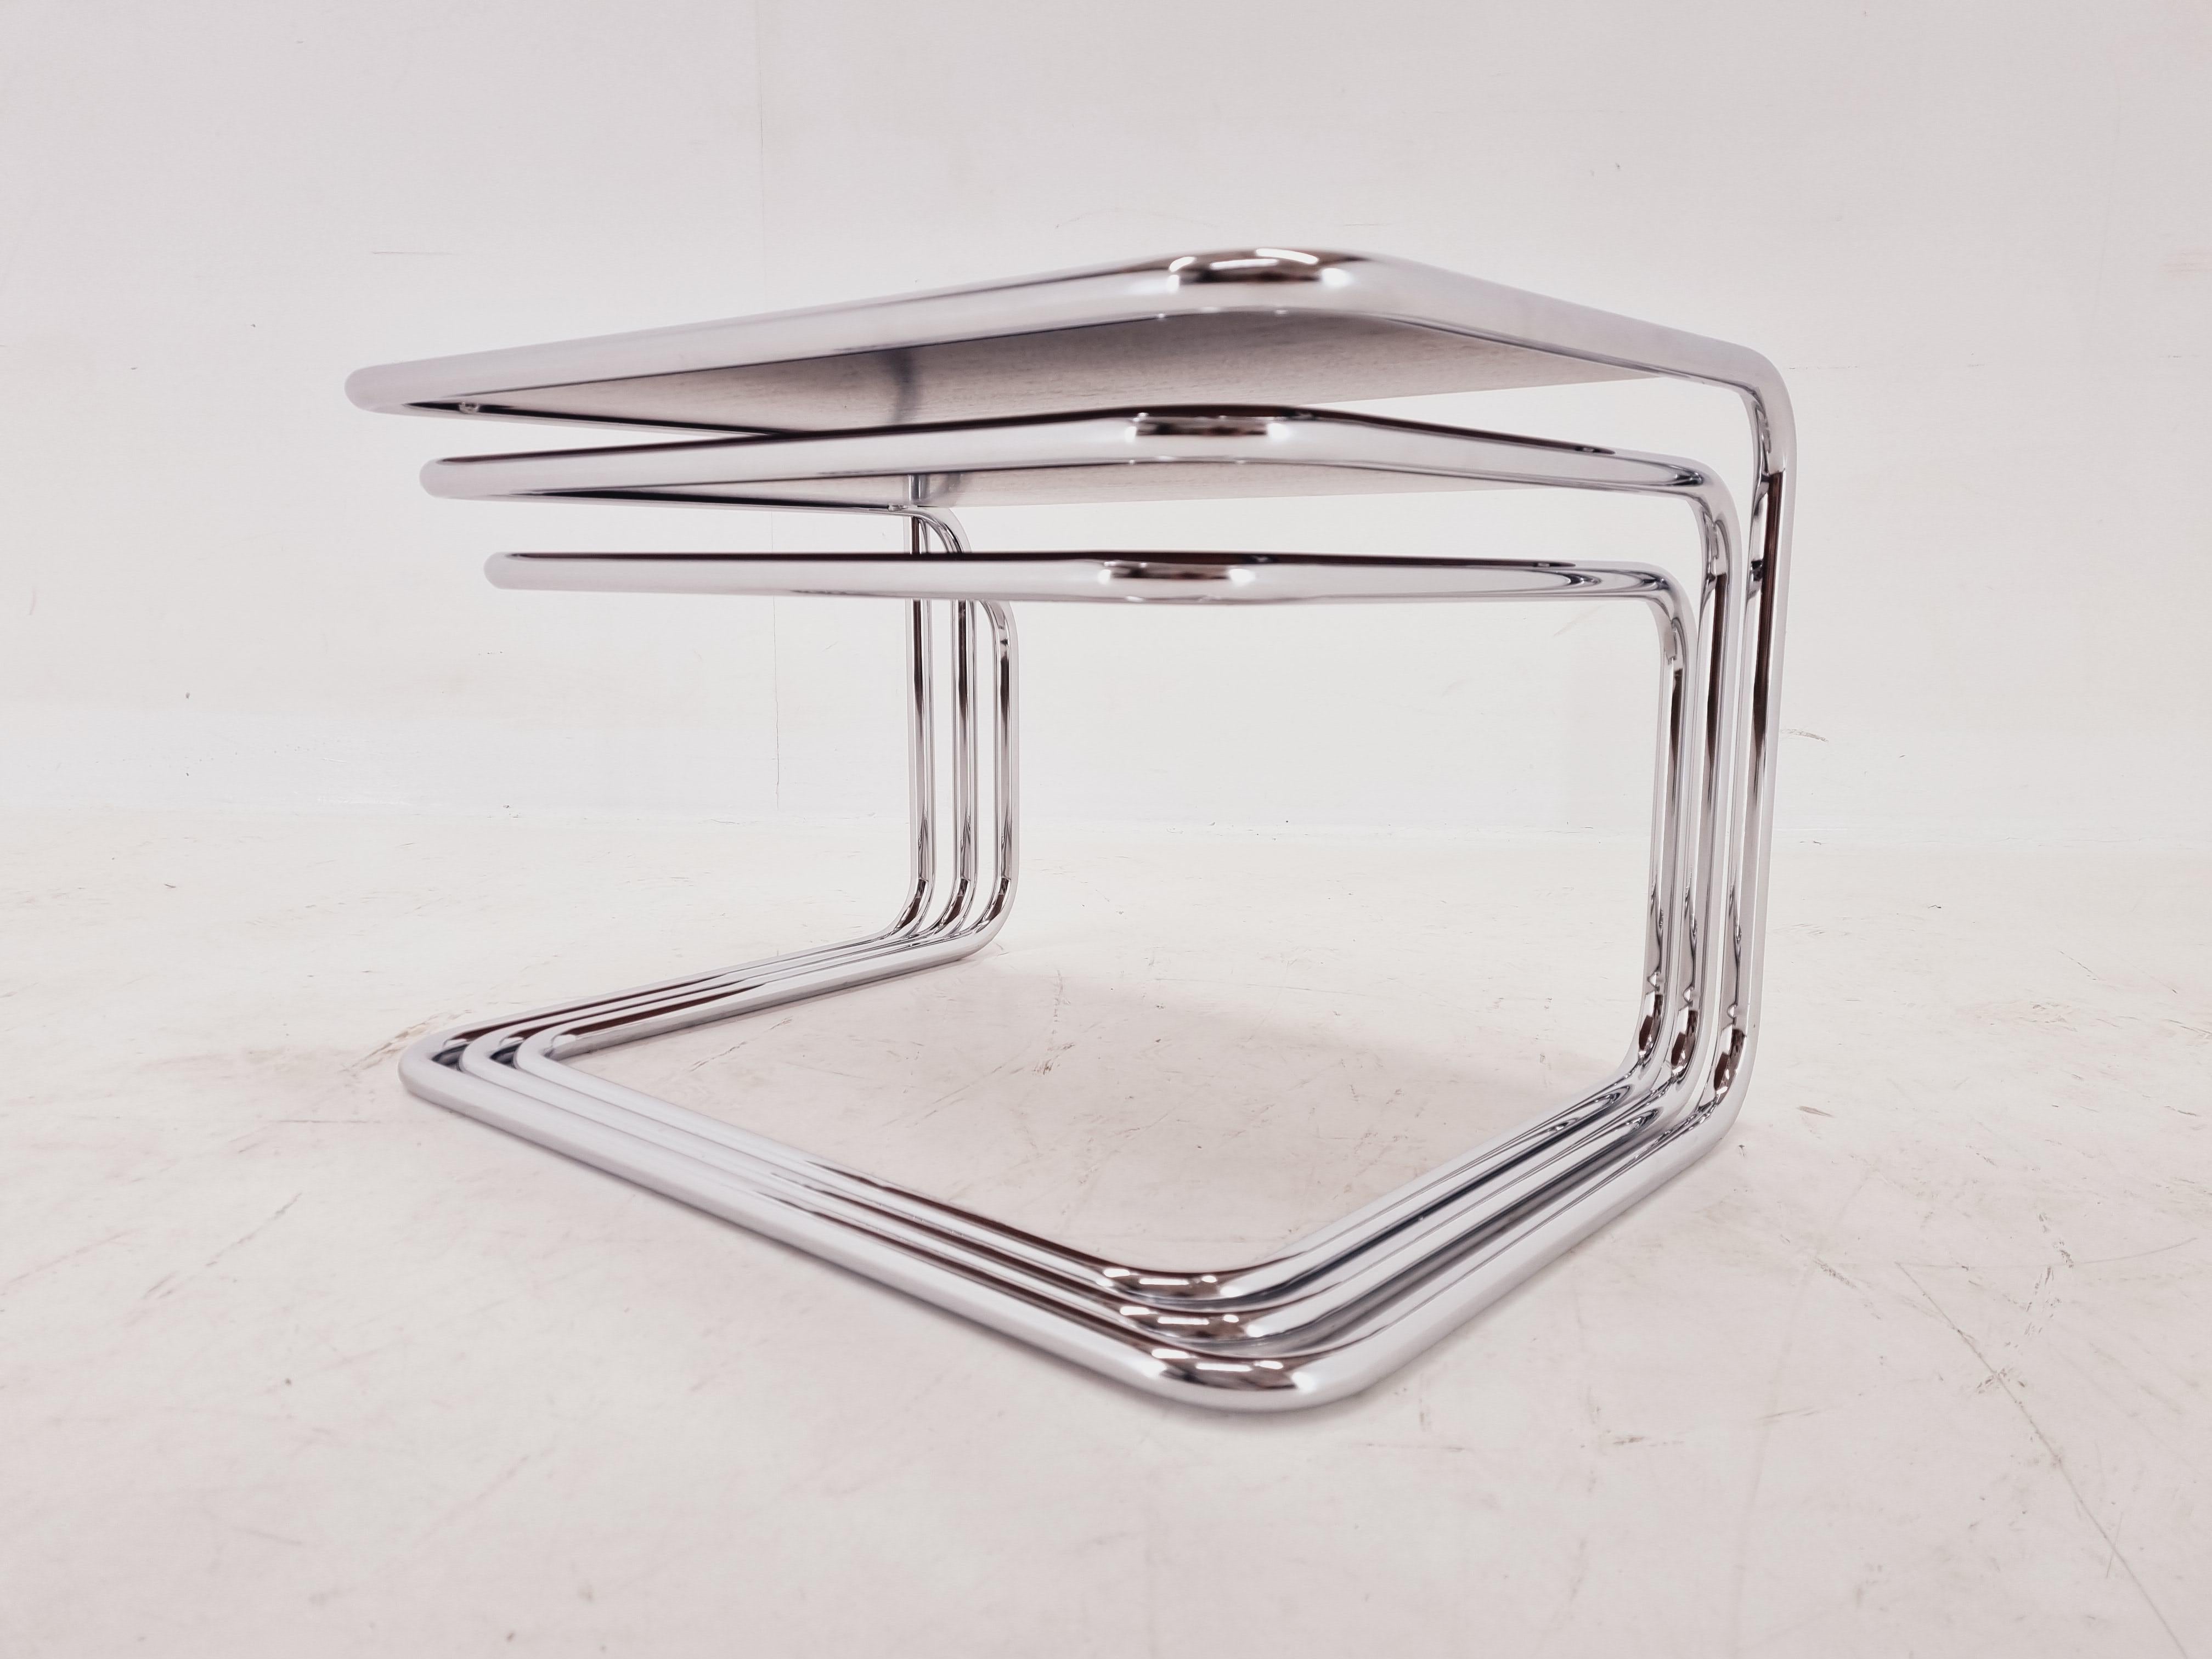 Exclusive Rare Midcentury Nesting Tables, Cocobolo Palisandr and Chrome, 1950s. For Sale 5